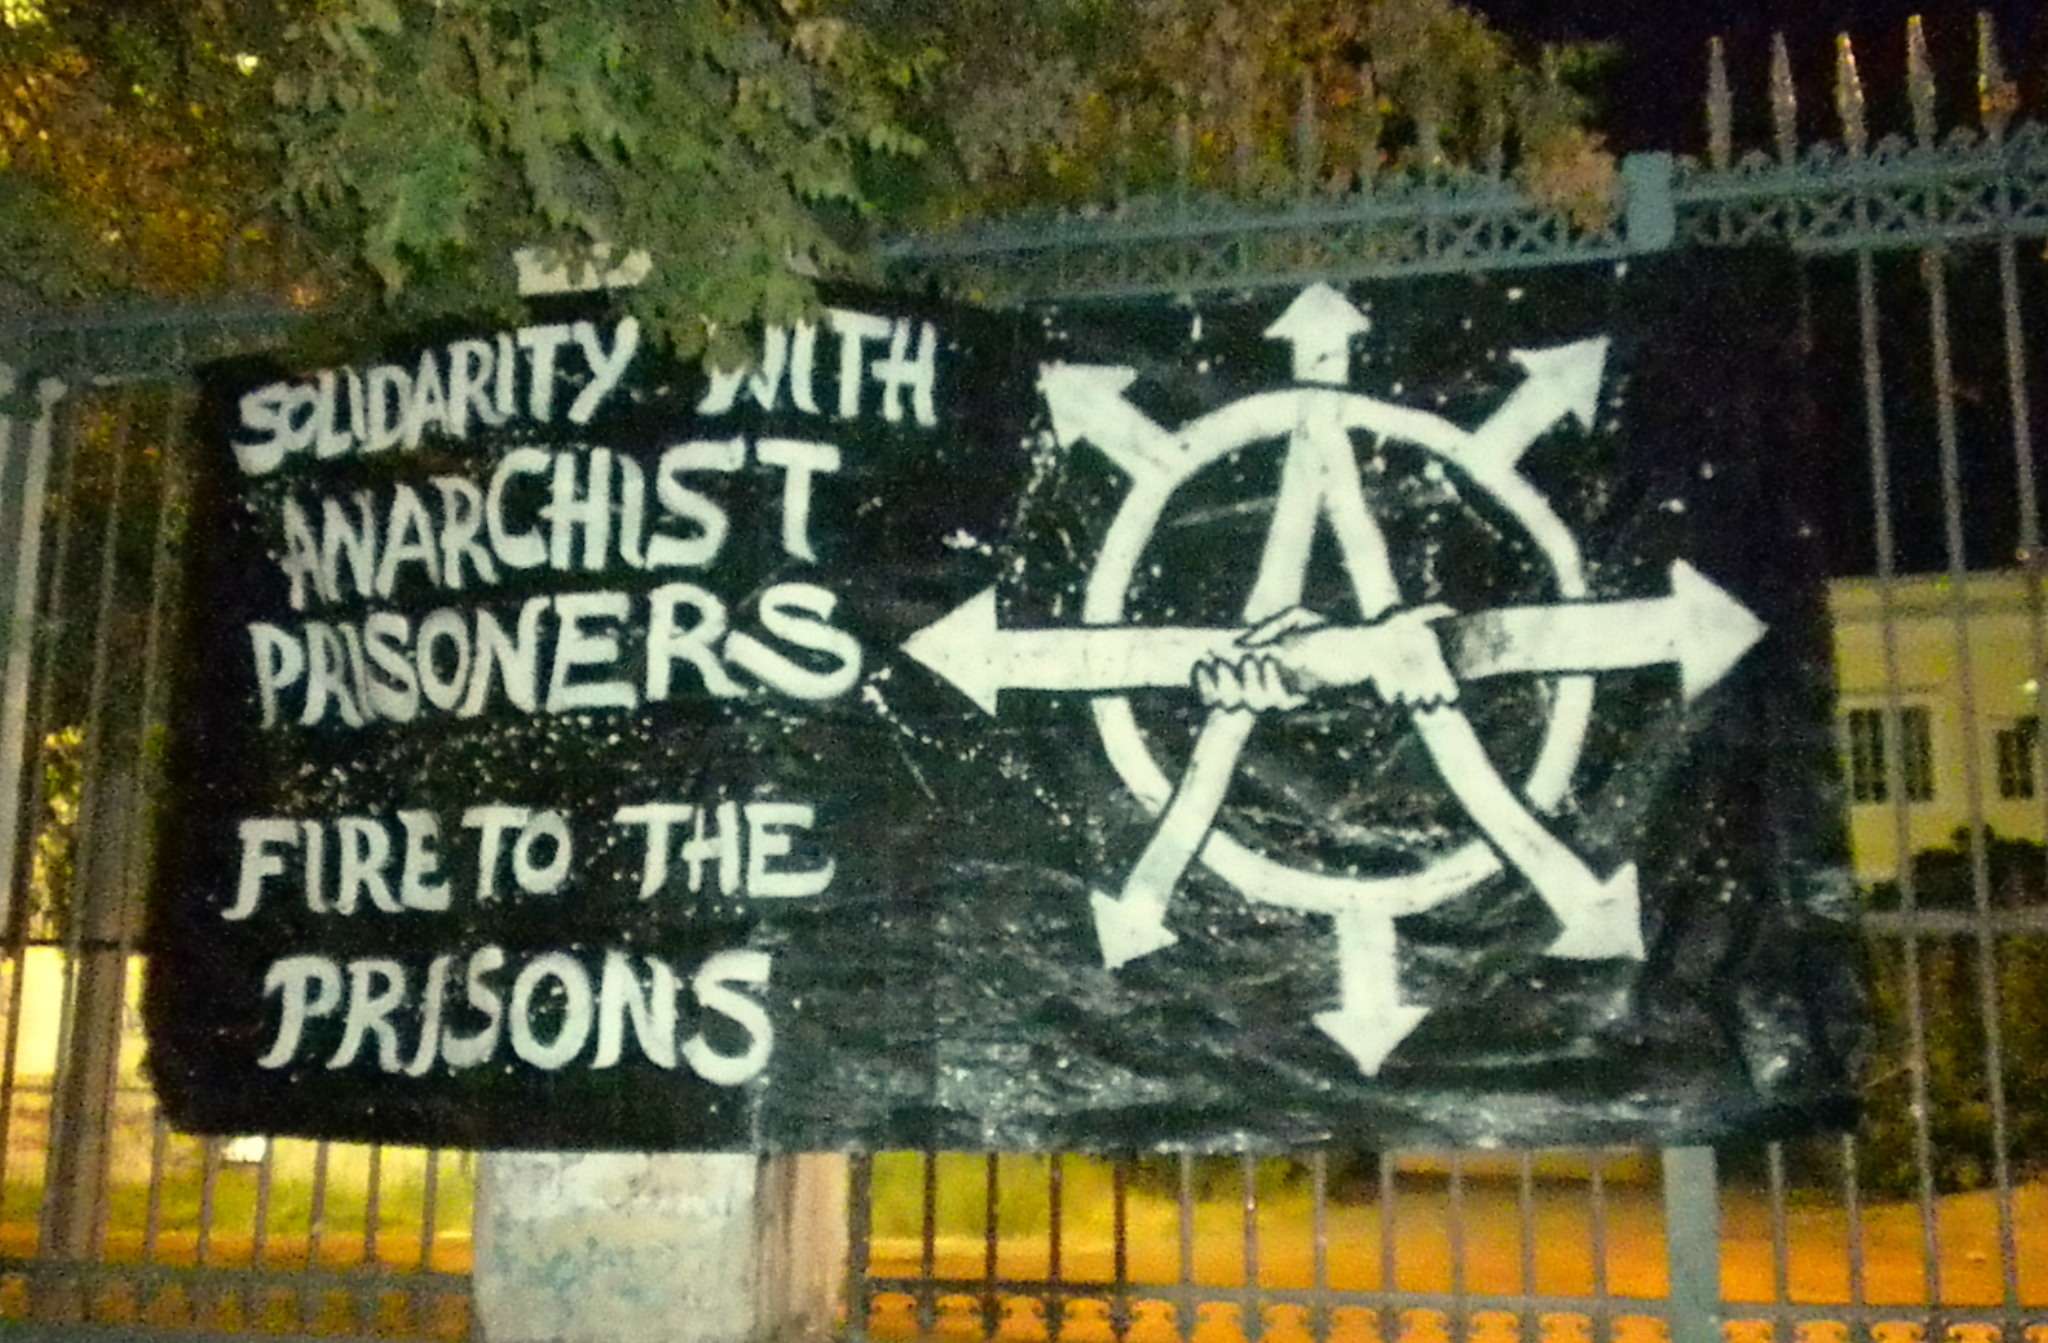 Greece: A contribution to the International Week of Solidarity with Anarchist Prisoners